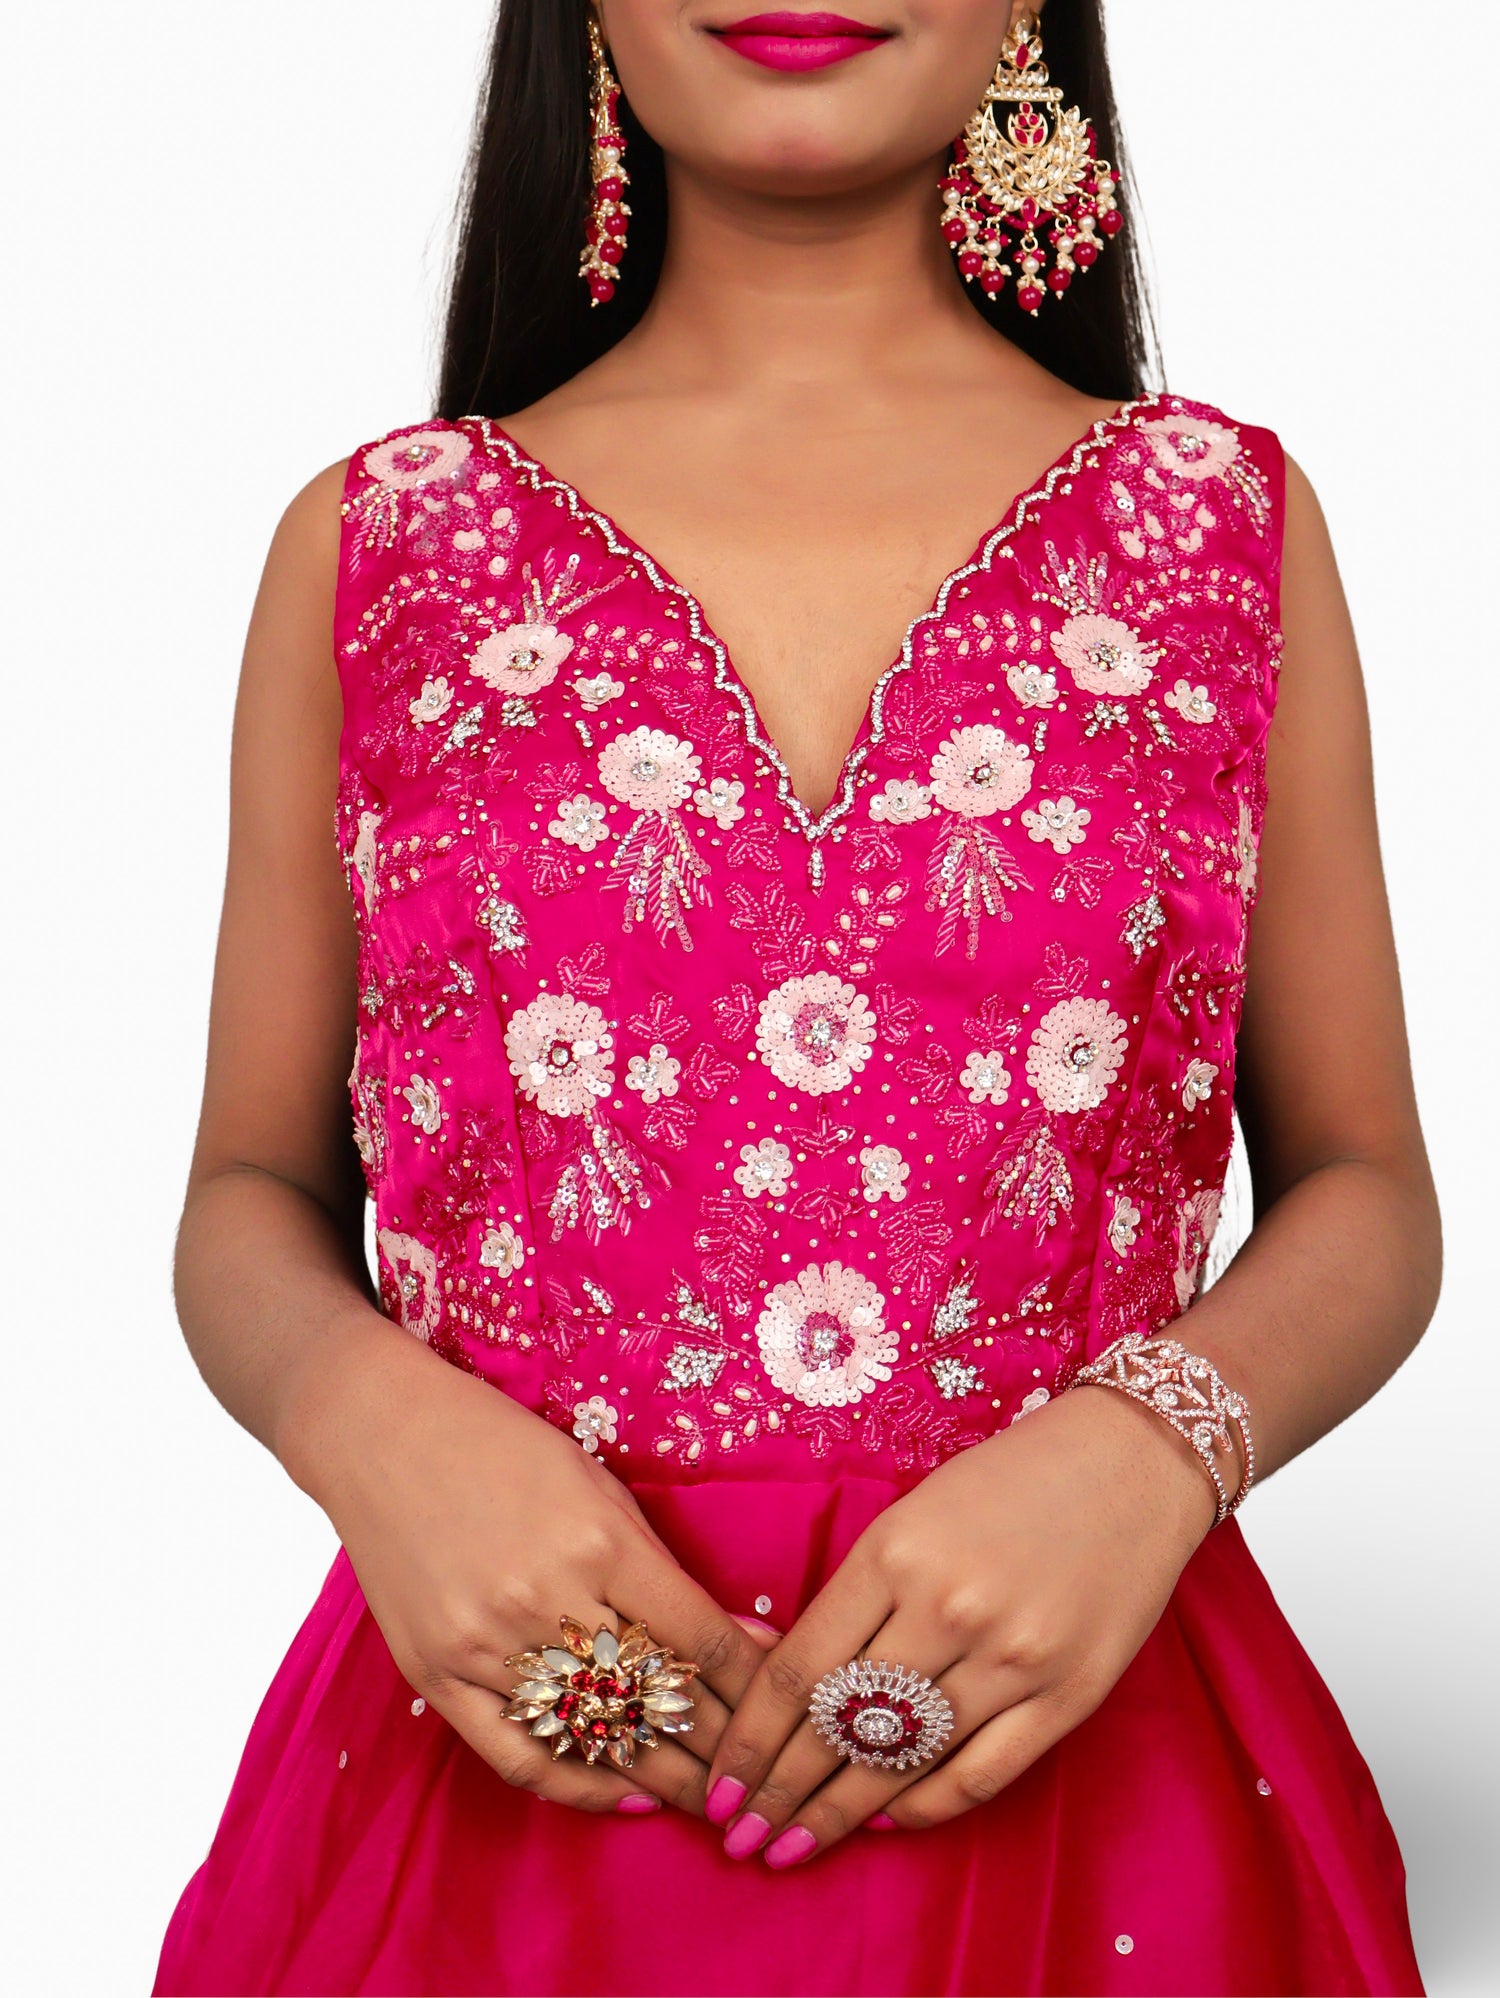 Gown with Sequin &amp; Cut Dana Work by Shreekama Magenta Designer Gowns for Party Festival Wedding Occasion in Noida